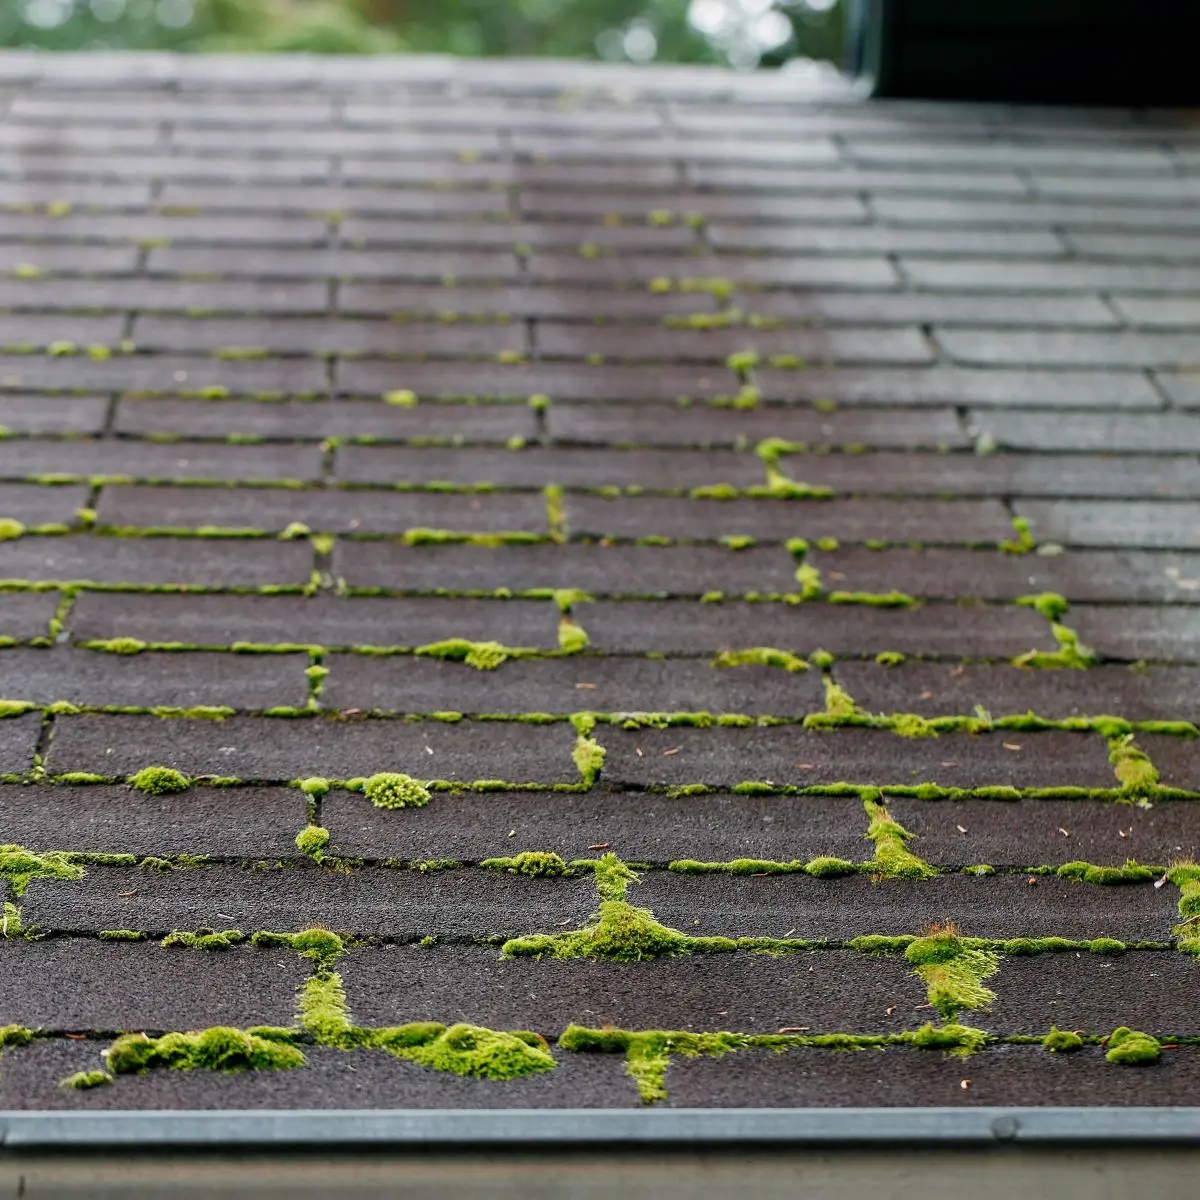 Algae and moss growing on Hedwig Village roofing